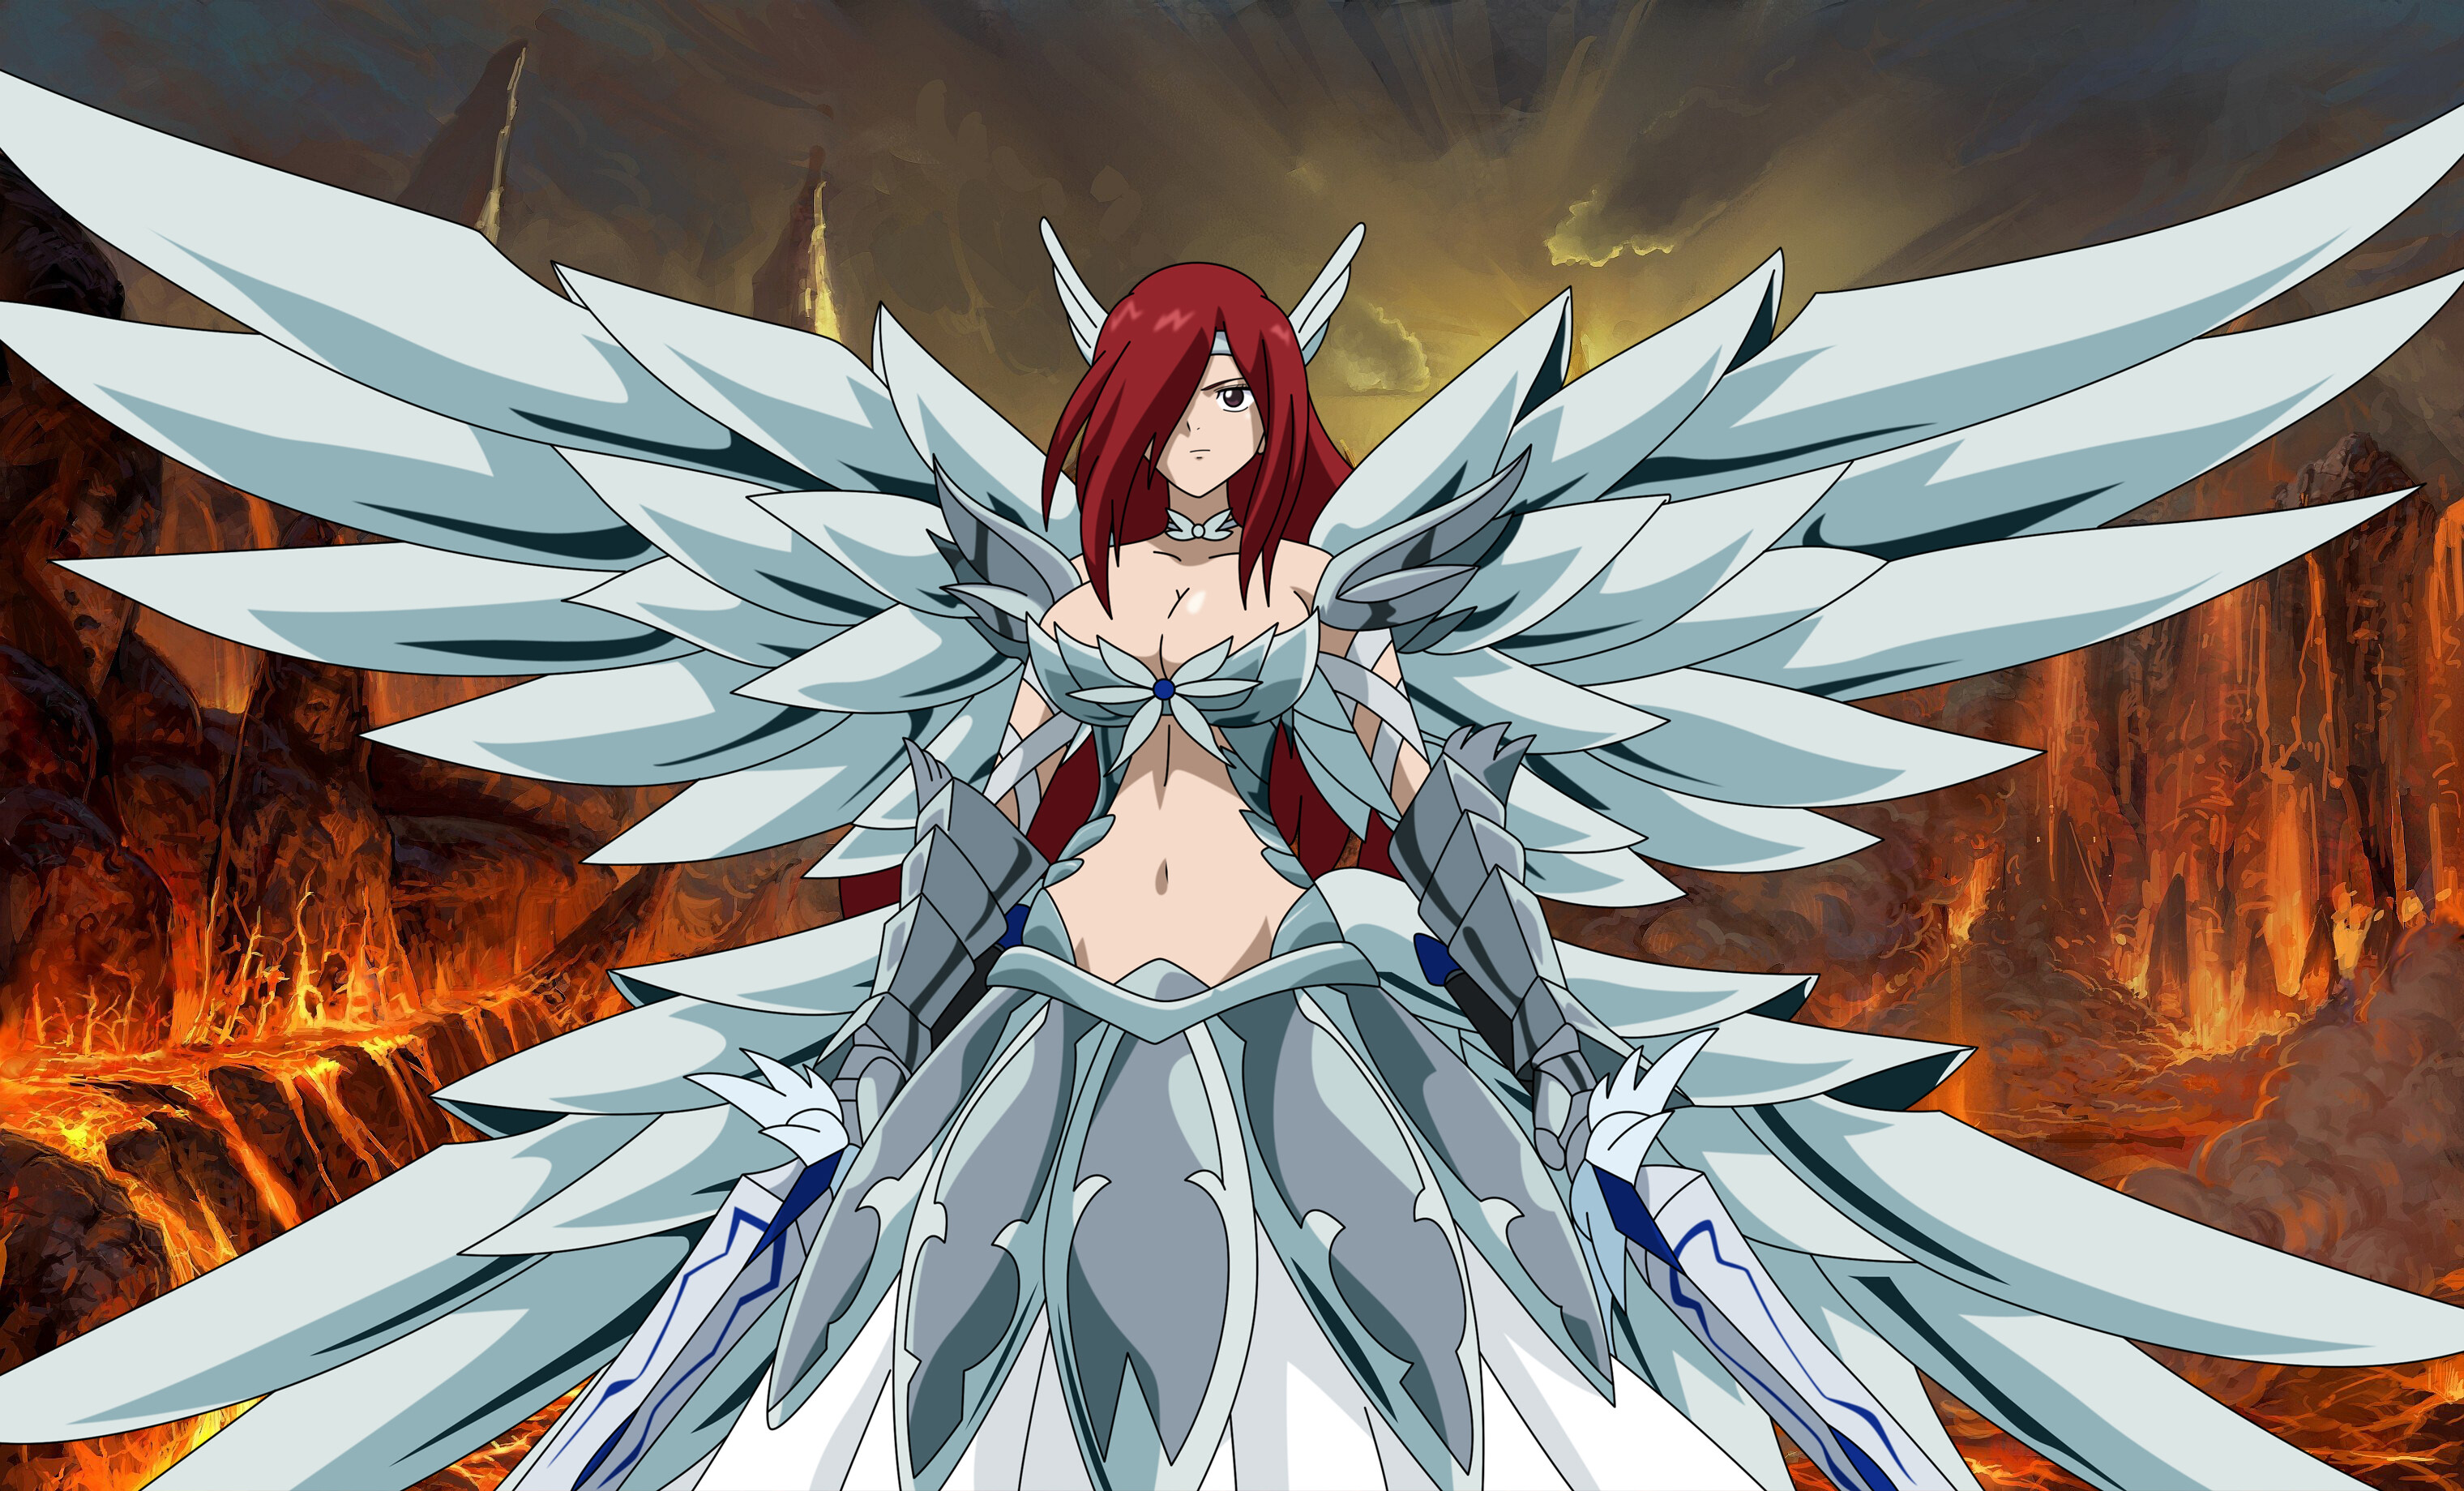 Fairy Tail: Anime, Erza Scarlet, an S-Class Mage, a member of Team Natsu. 3040x1840 HD Wallpaper.